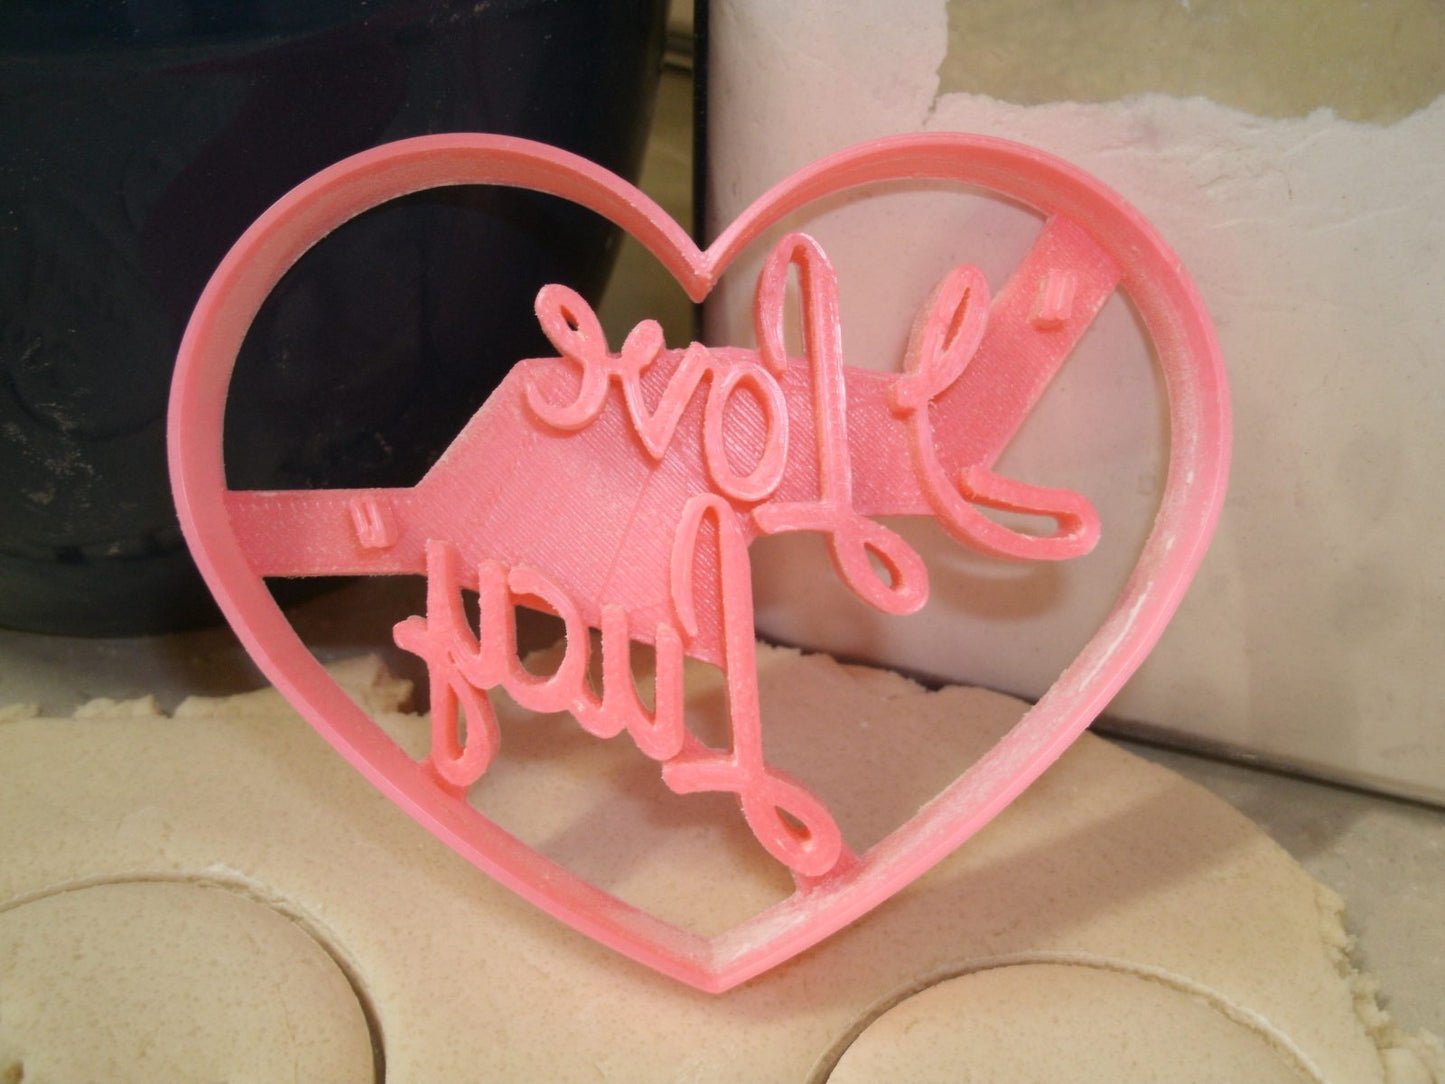 I Love Lucy Old Sitcom 1950s TV Show Heart Logo Cookie Cutter USA PR2869